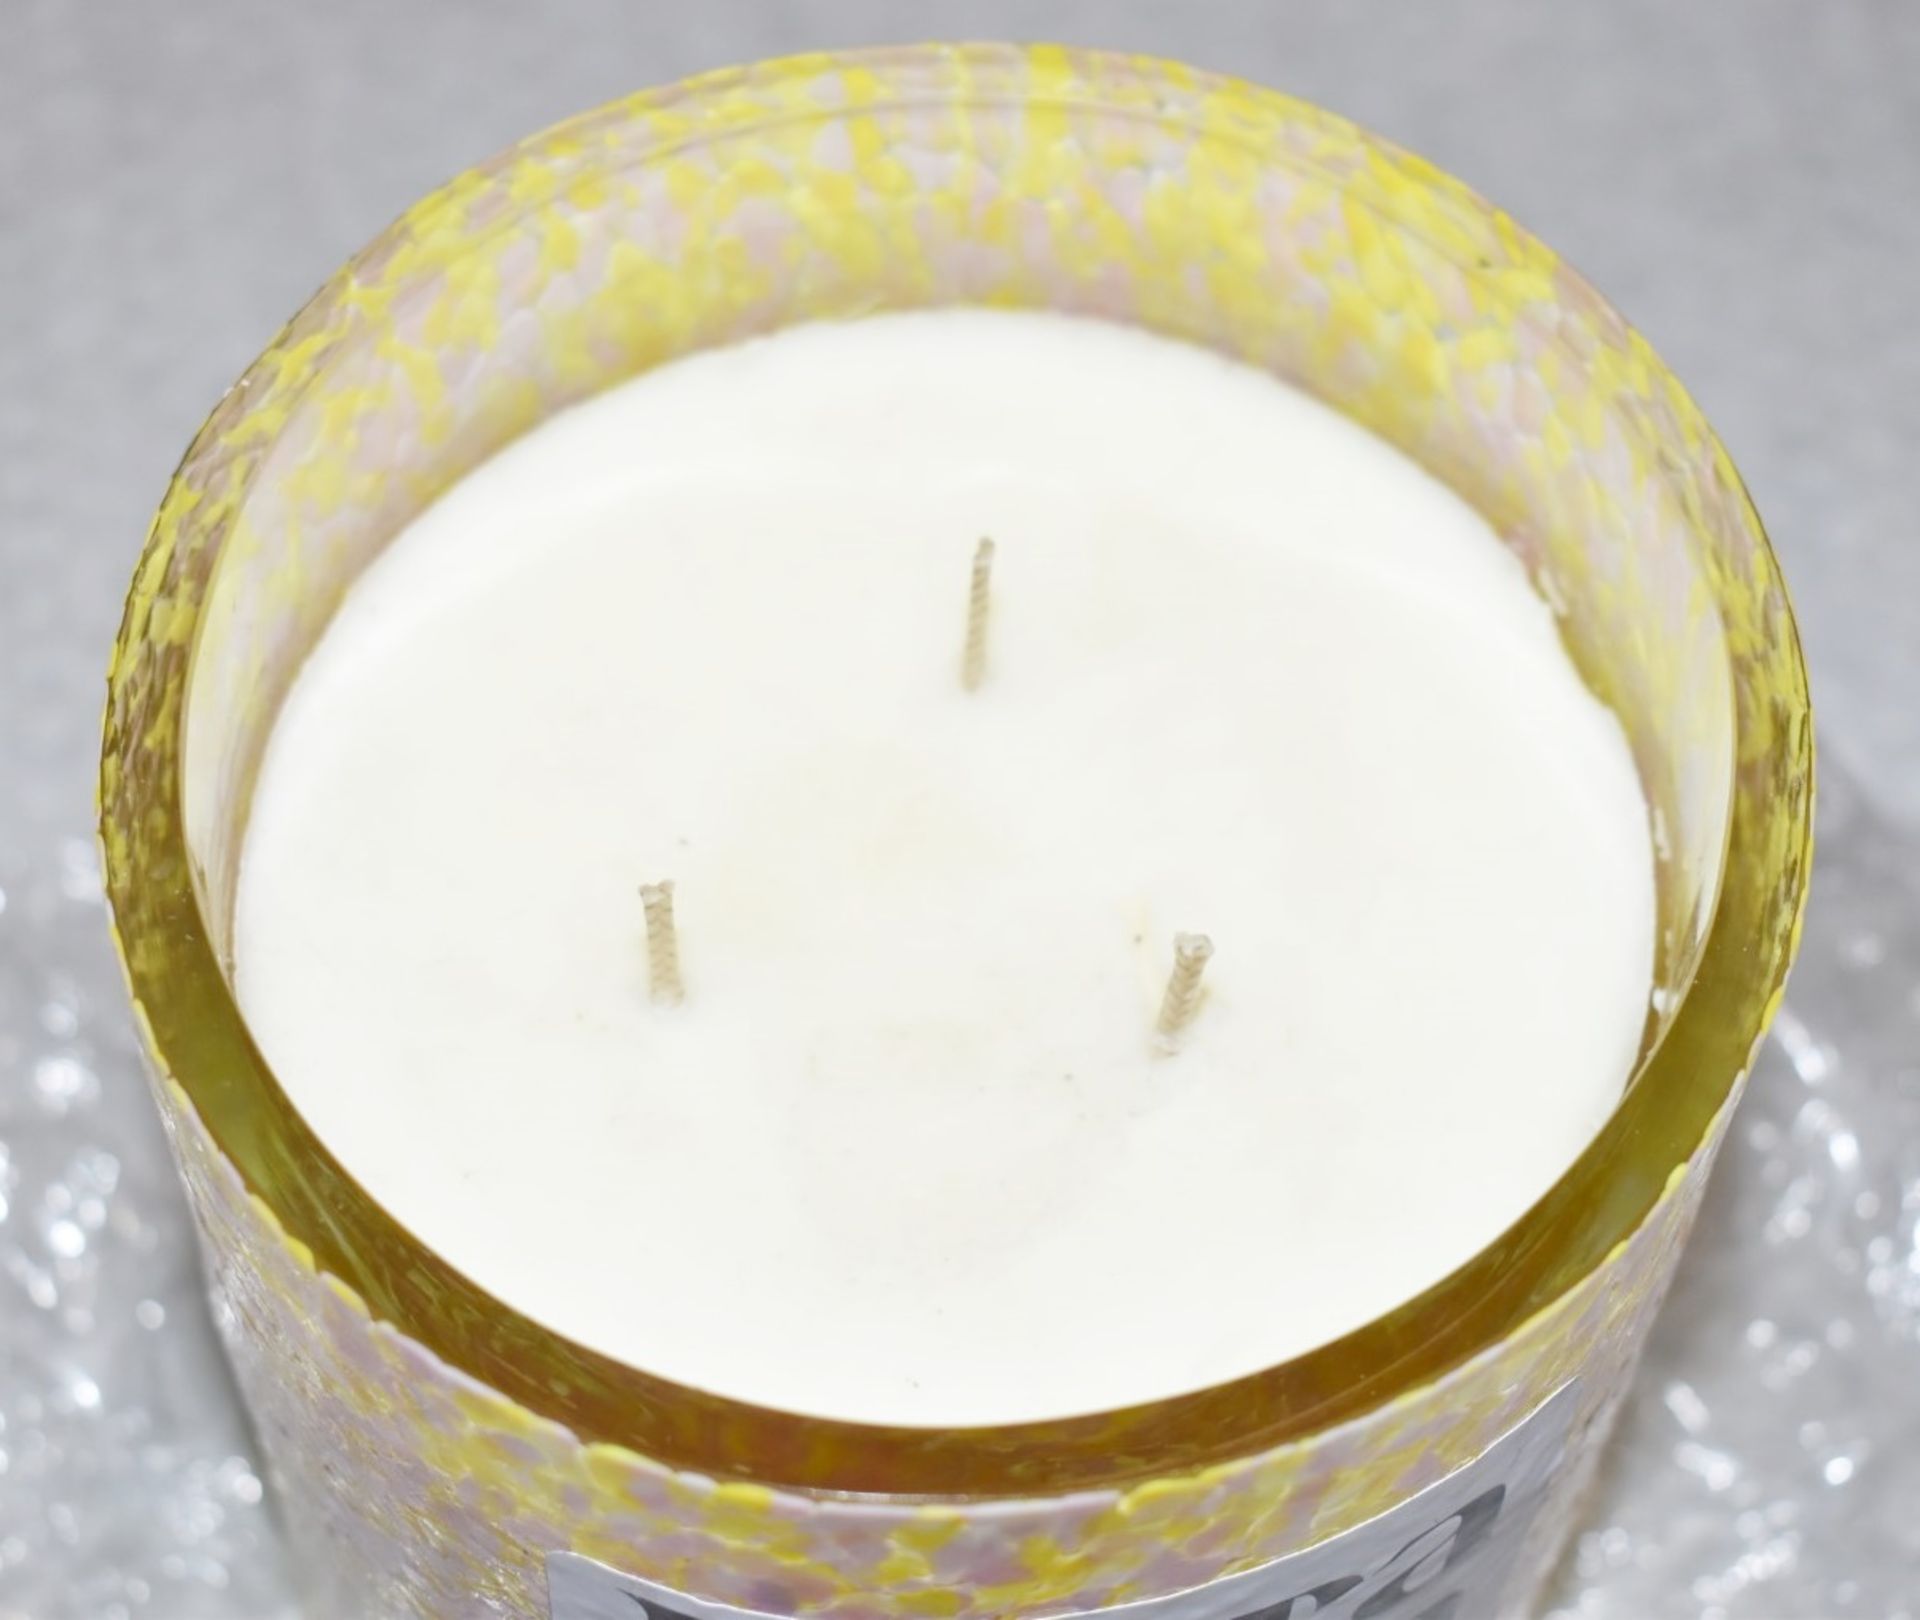 1 x STORIES OF ITALY 'Flora' Luxury Scented Candle with a Murano Glass Holderm 1.8kg - RRP £375.00 - Image 6 of 9